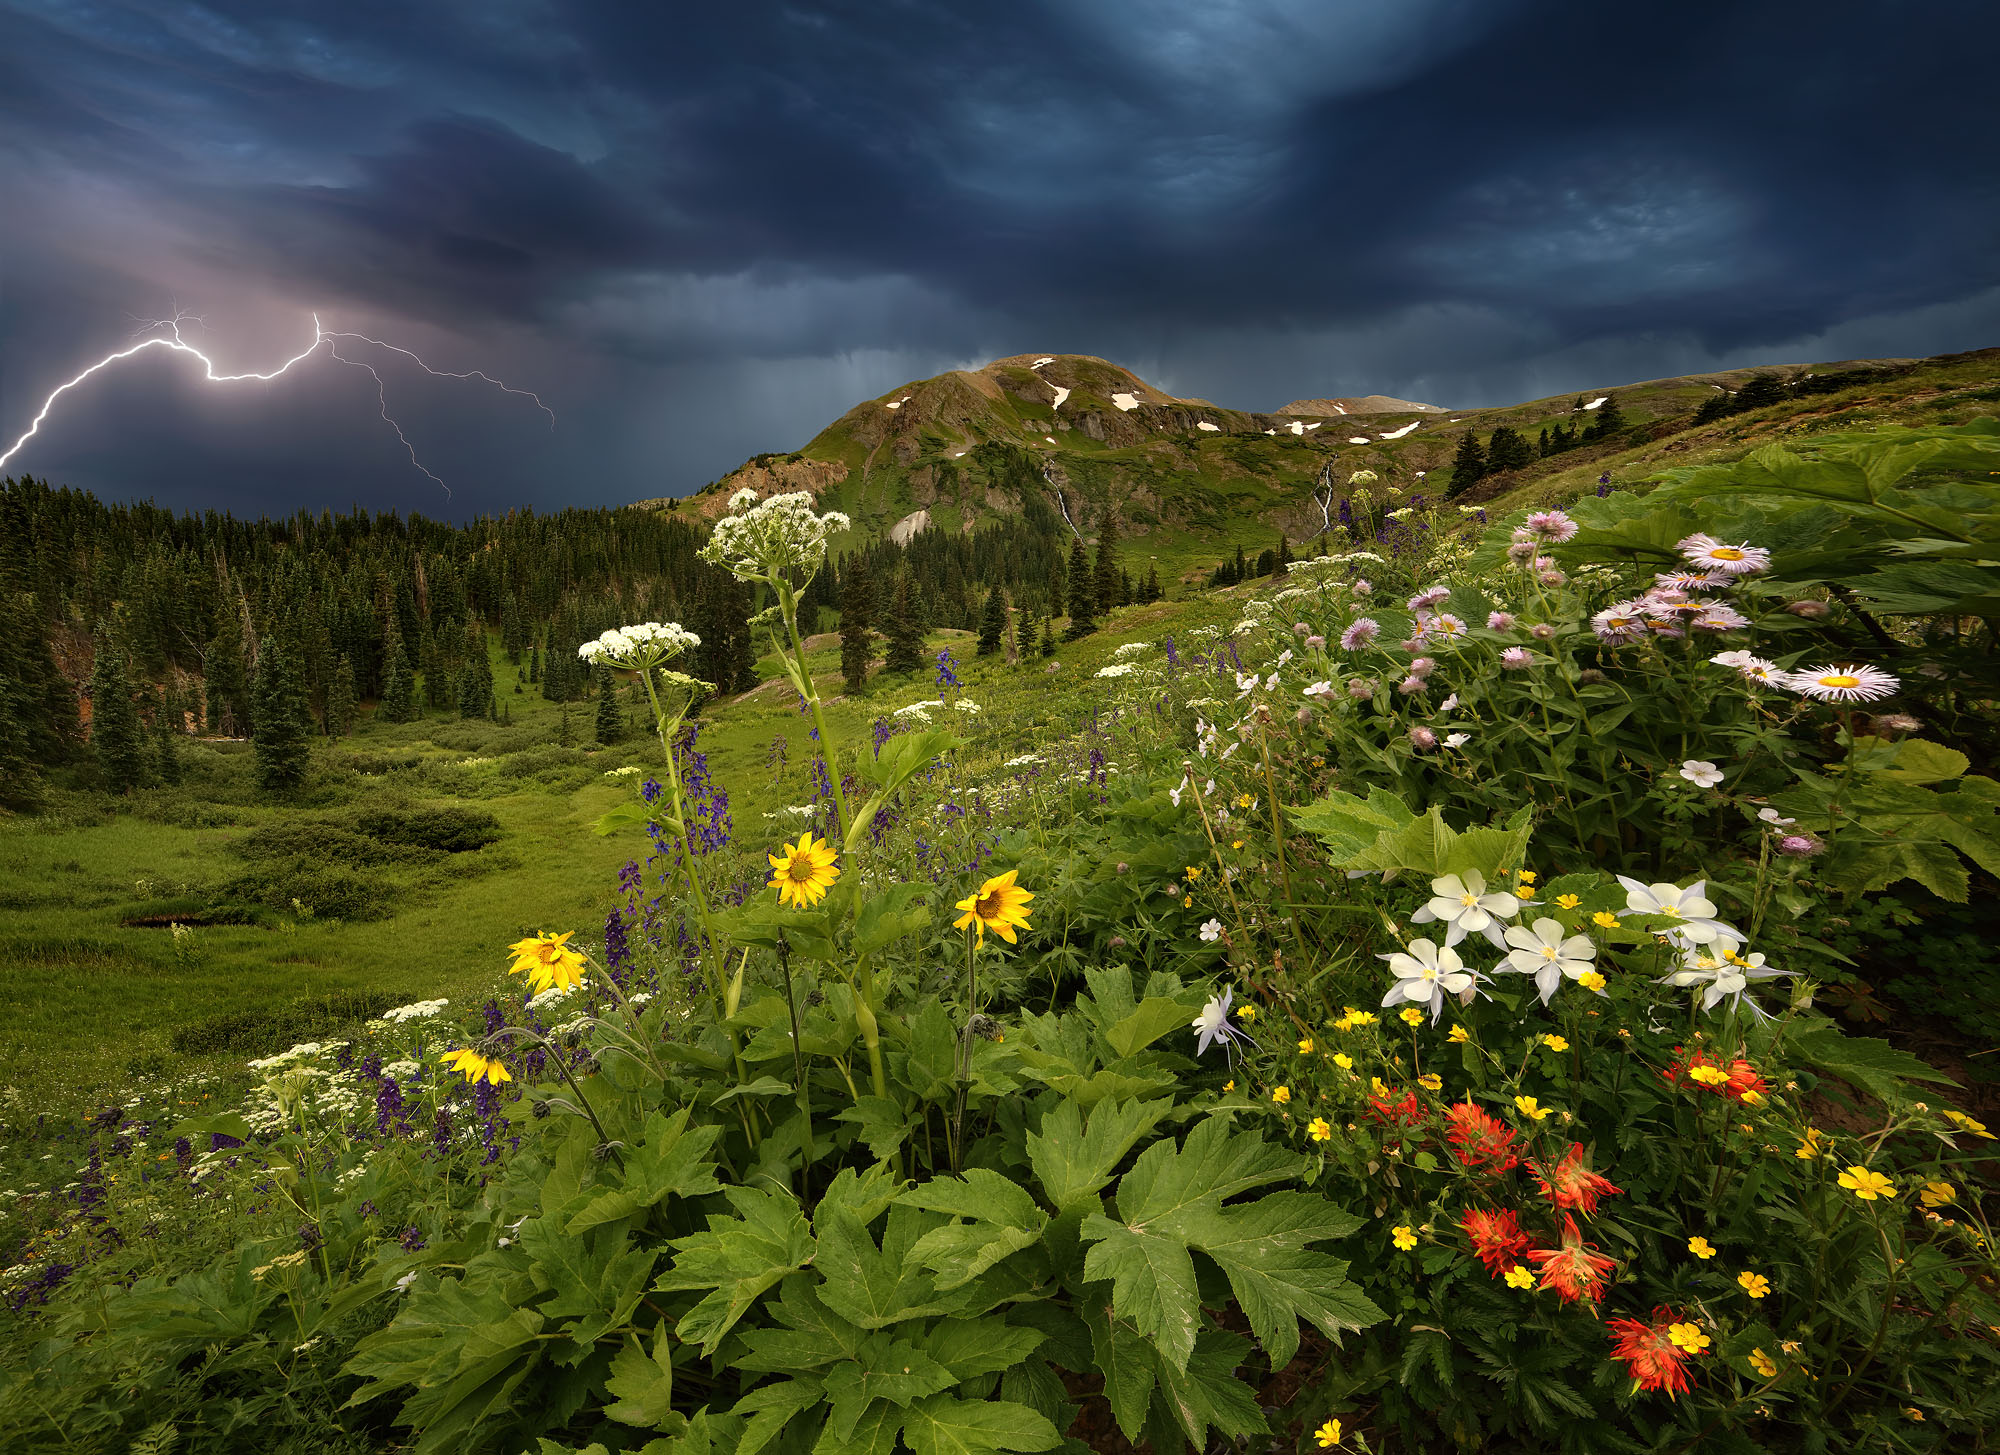 The wildflowers of the Rocky Mountains in a lightning storm near Silverton.